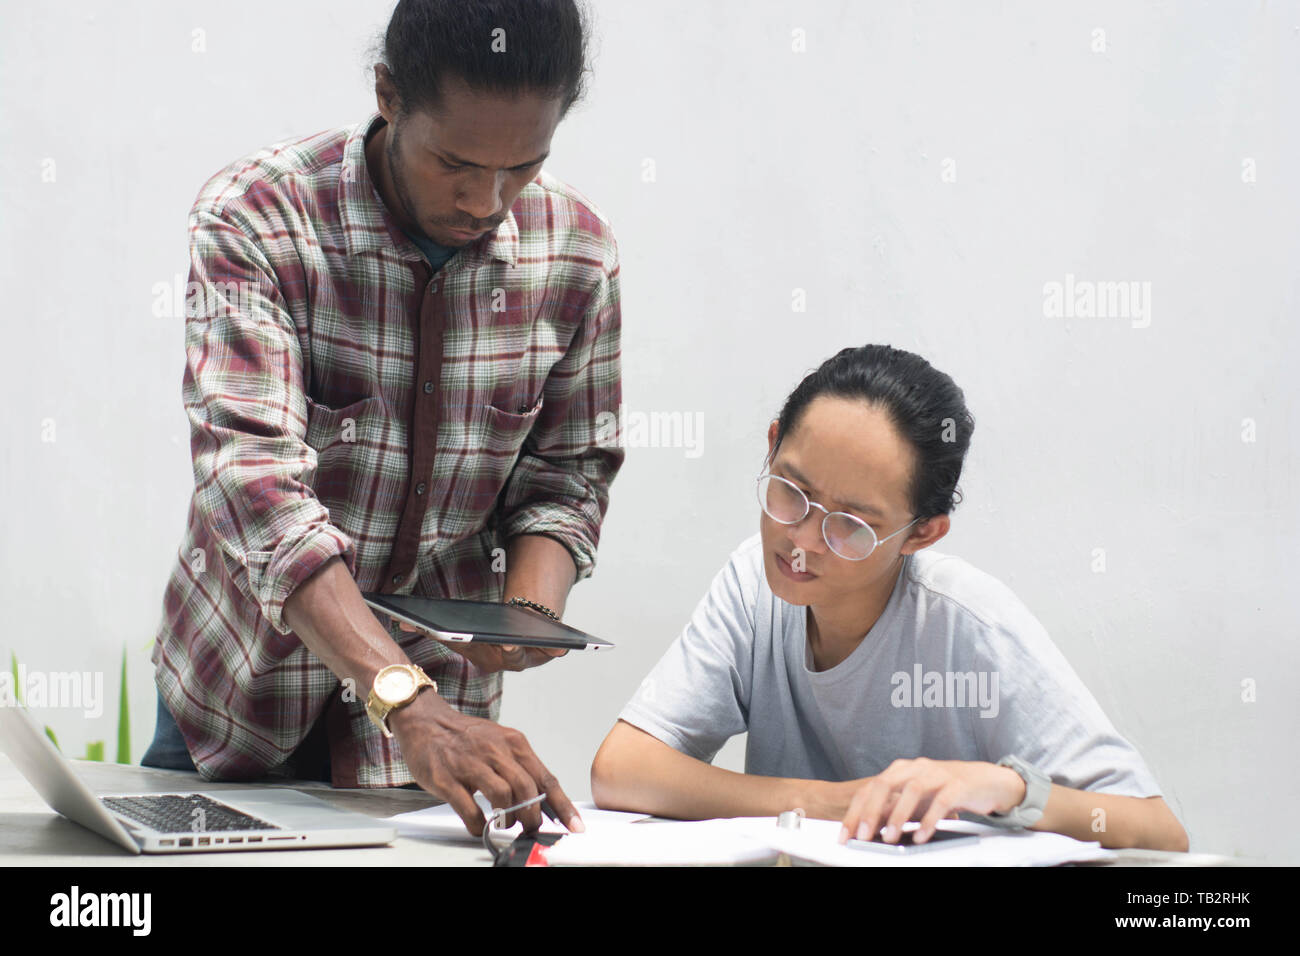 two friend with diffrent ethnic working together with laptop and tablet discussing something, two young man working and studying together Stock Photo